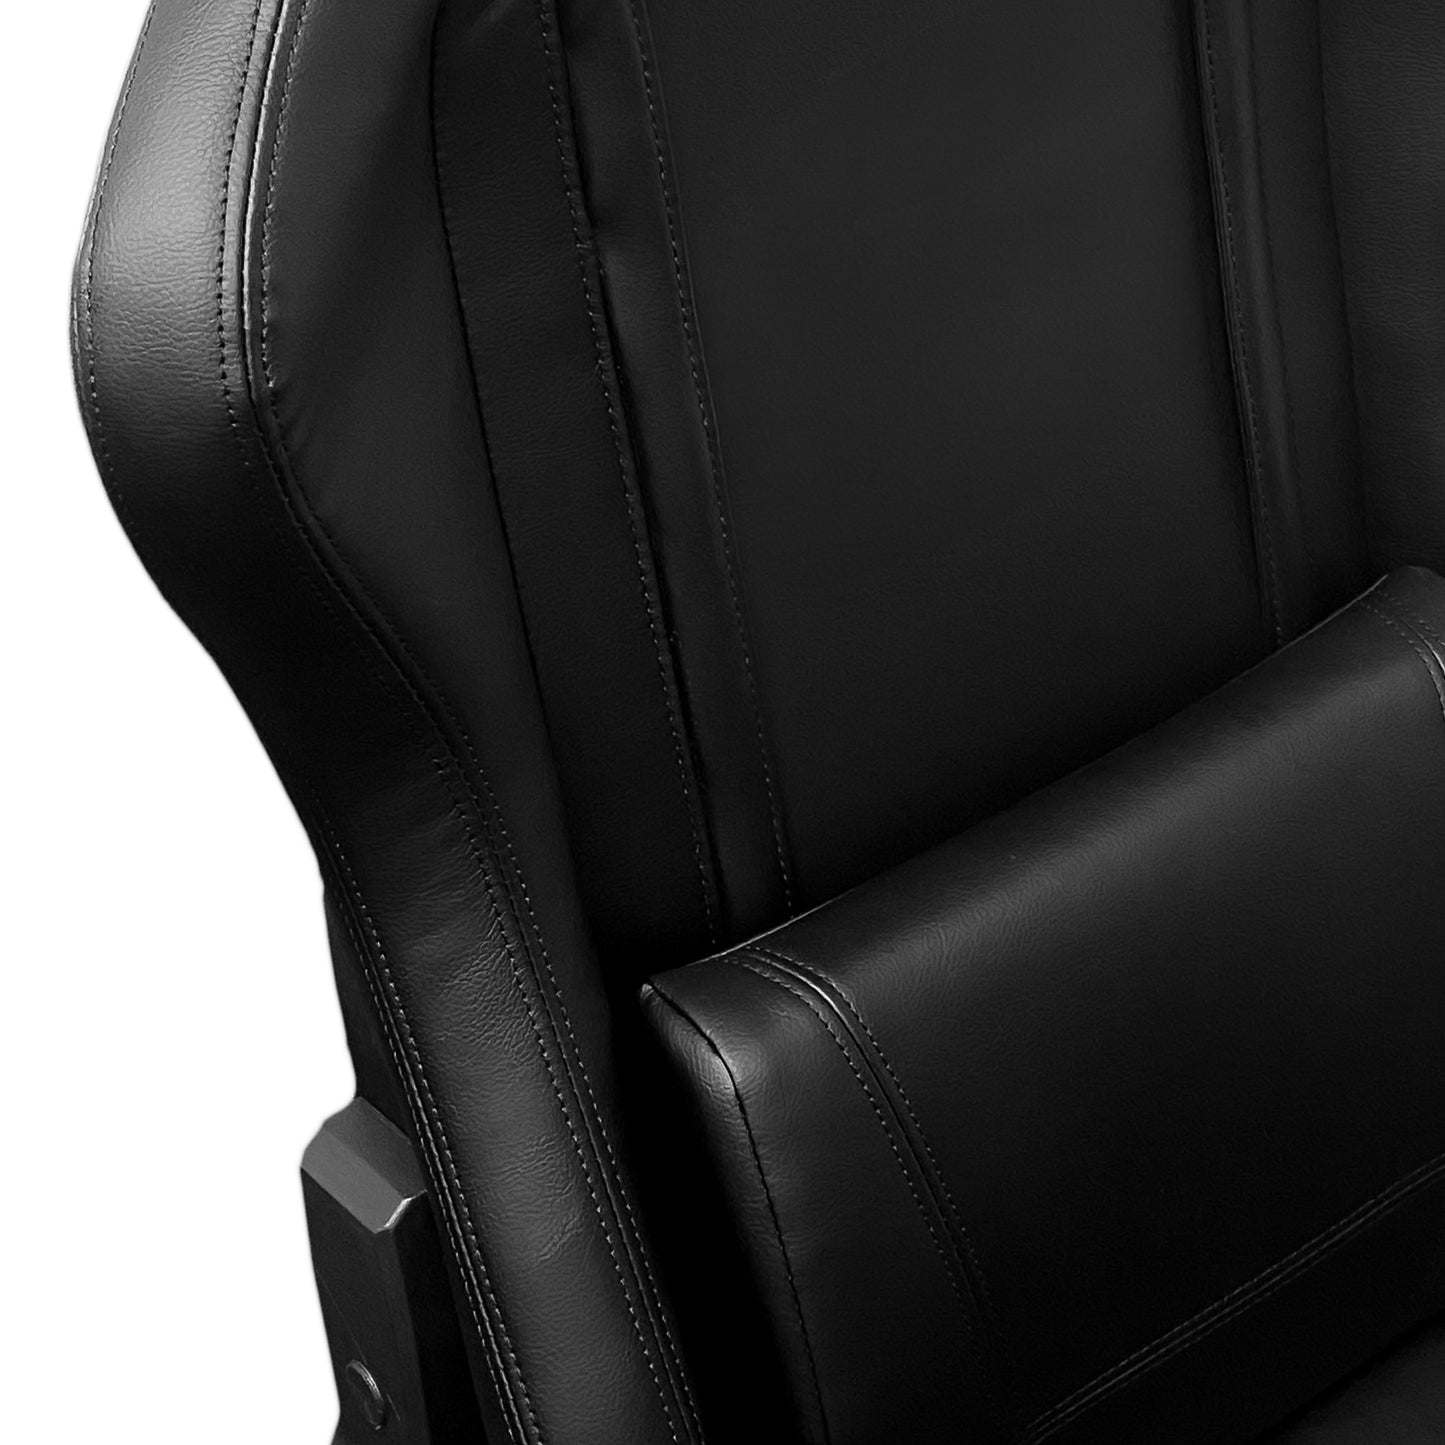 Xpression Pro Gaming Chair with Corvette C6 logo